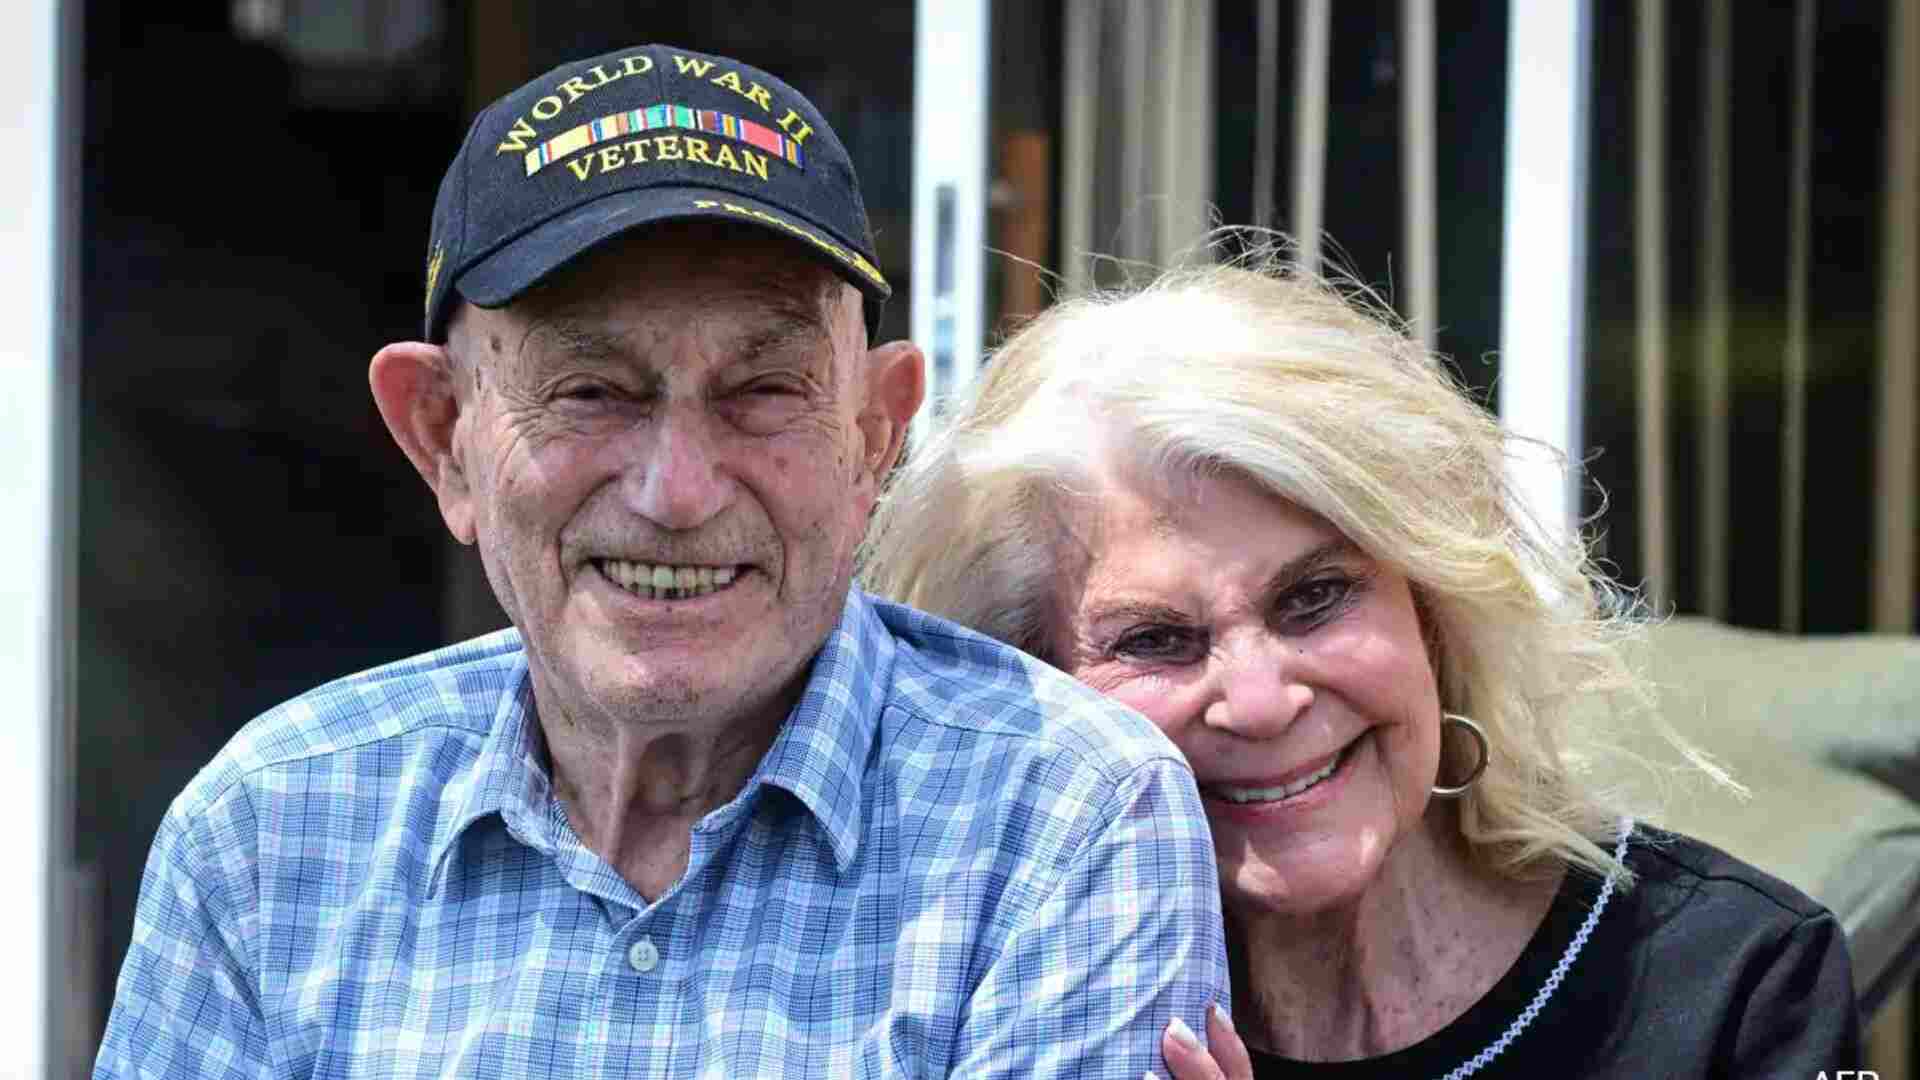 100-Year-Old World War II Veteran To Marry After D-Day Commemoration In France